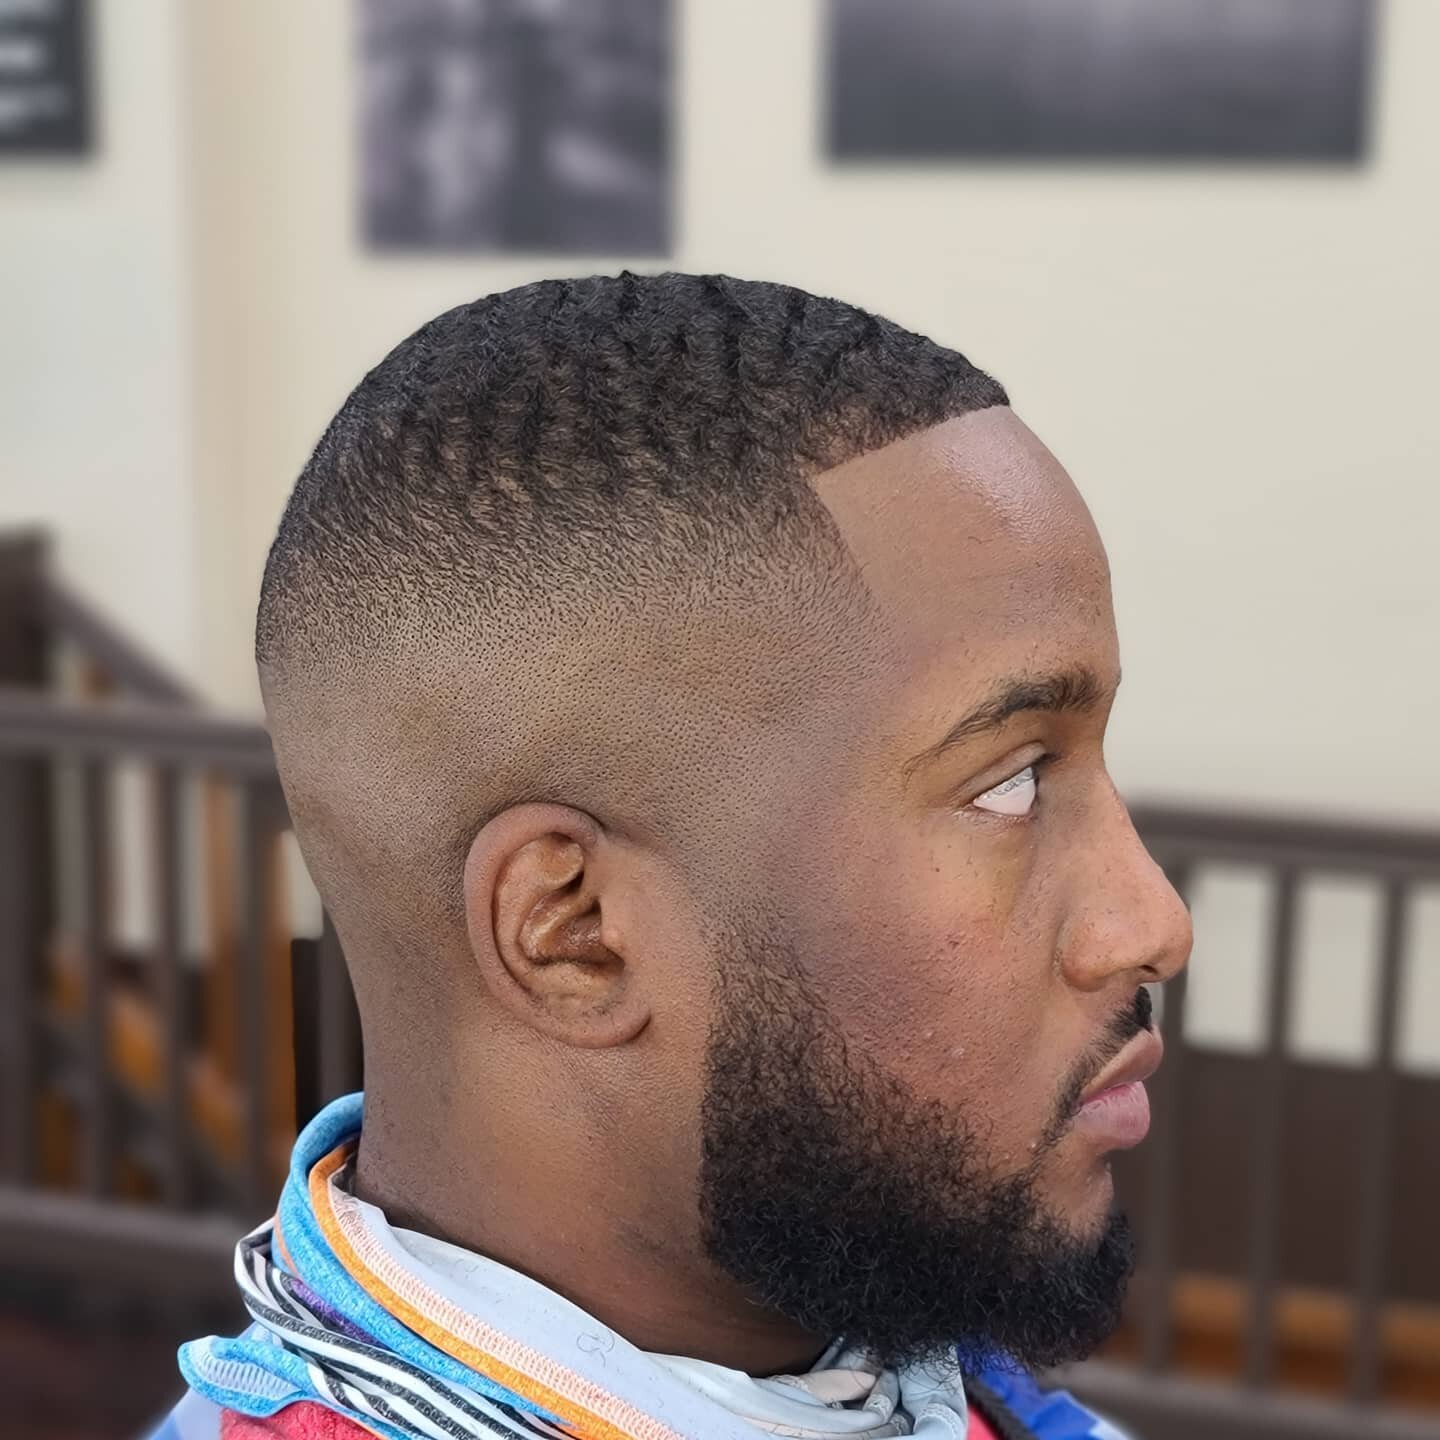 Limited spots available for the week. Dont wait until last minute. Go to
Www.westparkbarbershop.com to book your appointment now! Have a great week! 🙏

@barbershopconnect 
@hanzonation 
@clevelandbarbers 
#hair #haircut #hairstyle #barber #barbersho